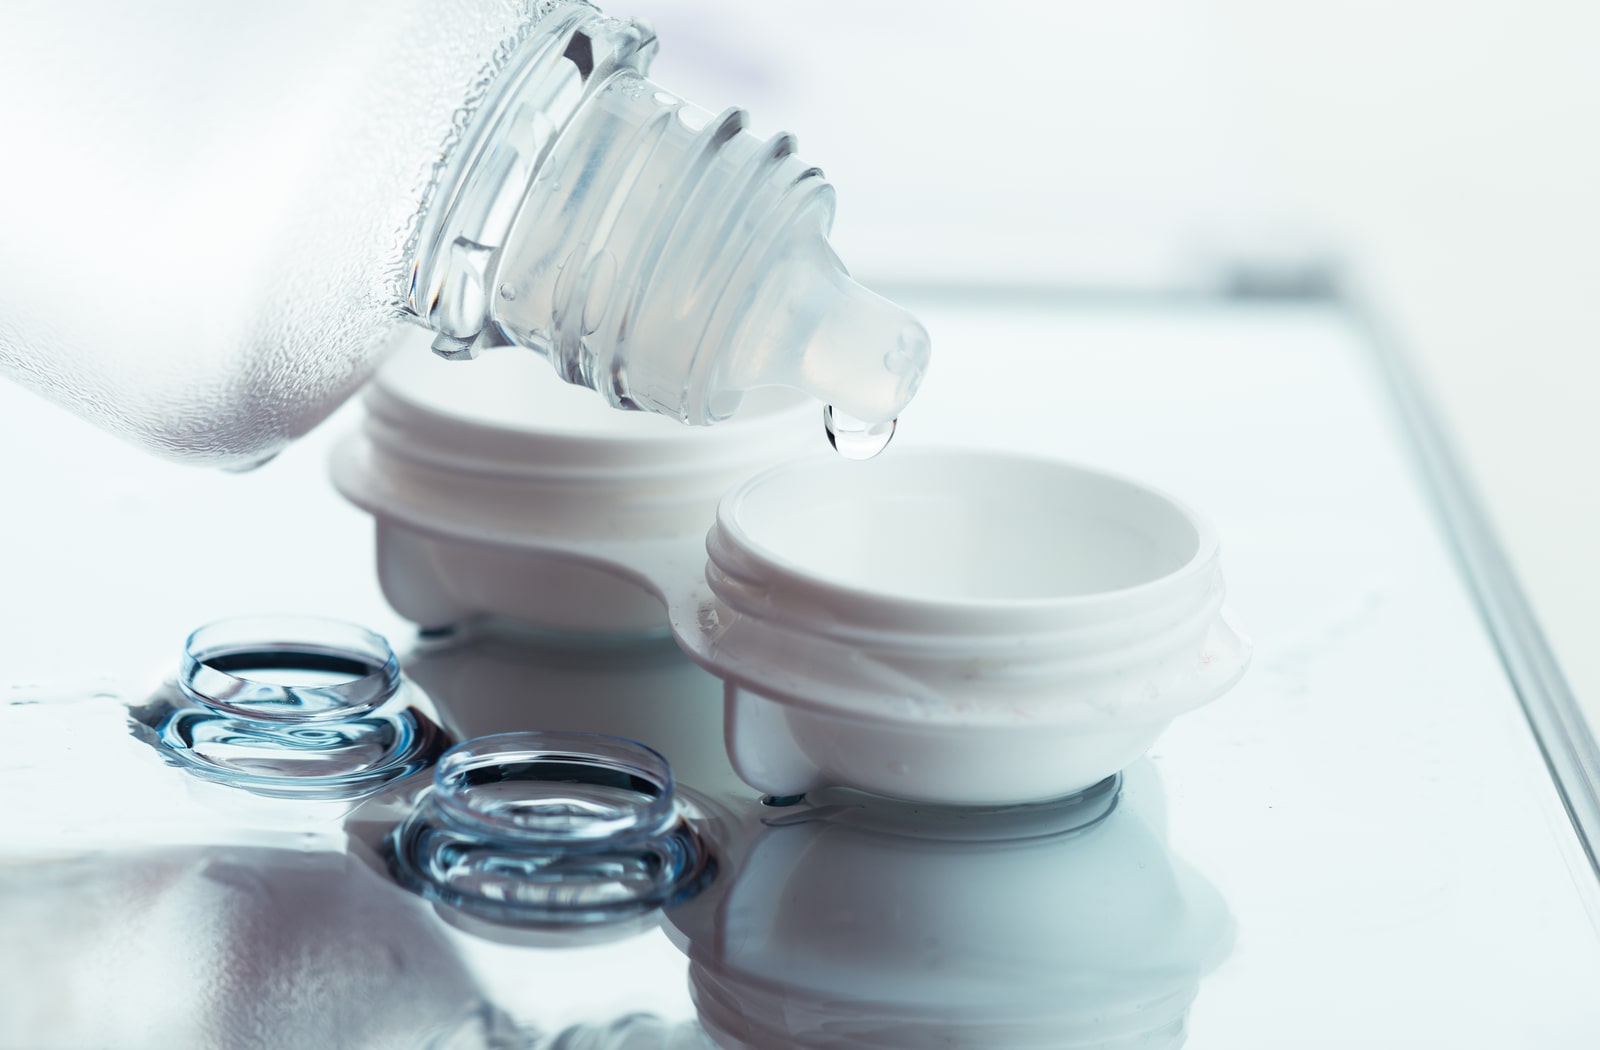 A pair of contact lenses sitting next to a contact lens case and someone pouring contact lens solution in the case